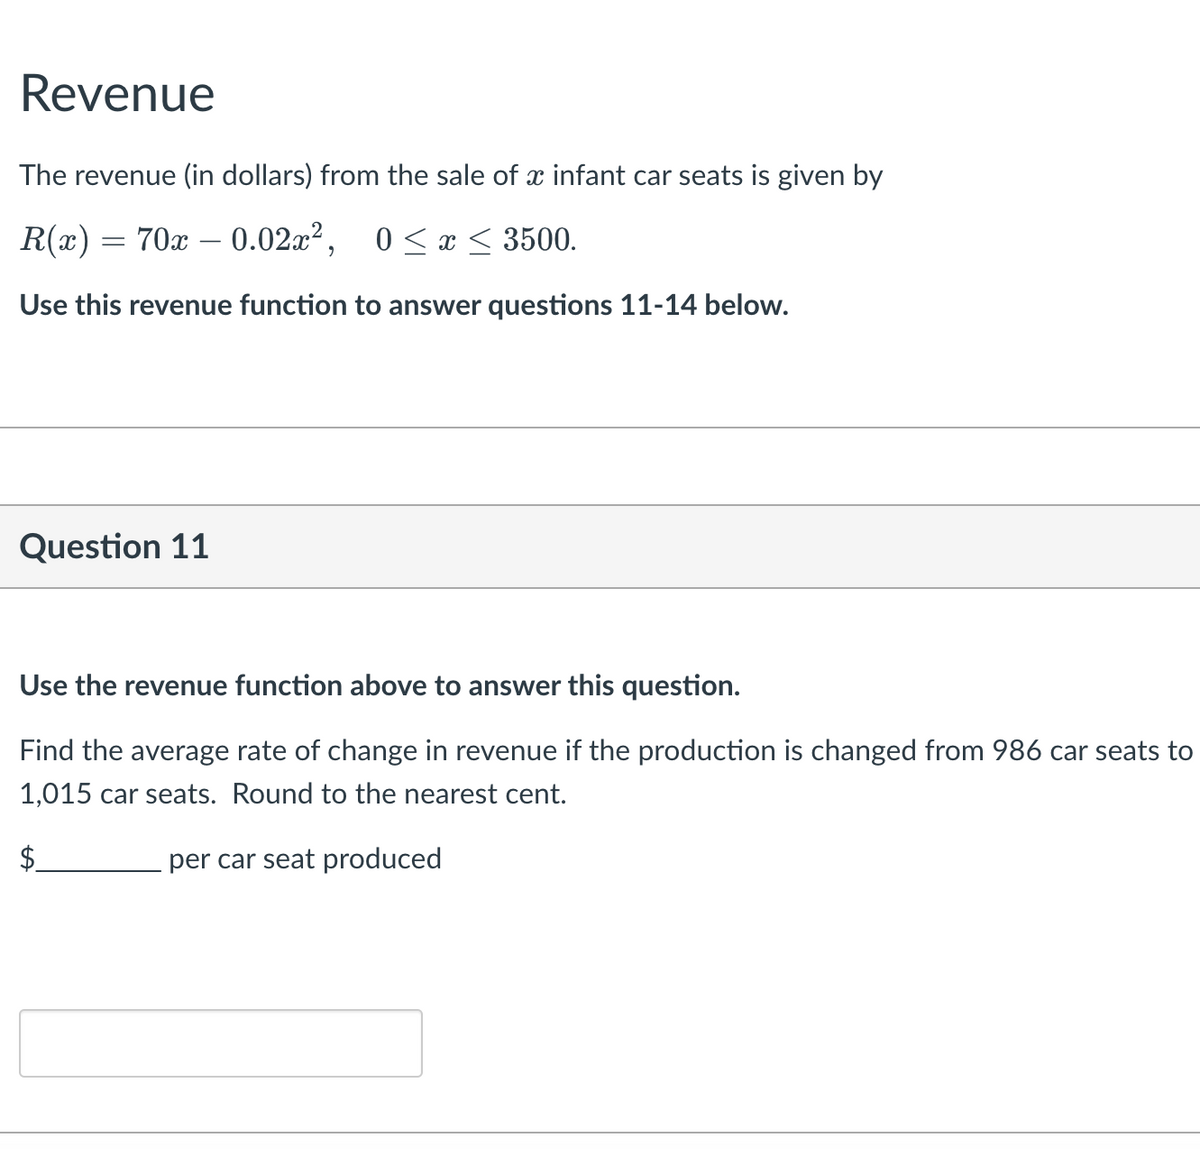 Revenue
The revenue (in dollars) from the sale of x infant car seats is given by
R(x) = 70x – 0.02x², 0<x < 3500.
-
Use this revenue function to answer questions 11-14 below.
Question 11
Use the revenue function above to answer this question.
Find the average rate of change in revenue if the production is changed from 986 car seats to
1,015 car seats. Round to the nearest cent.
$.
per car seat produced
